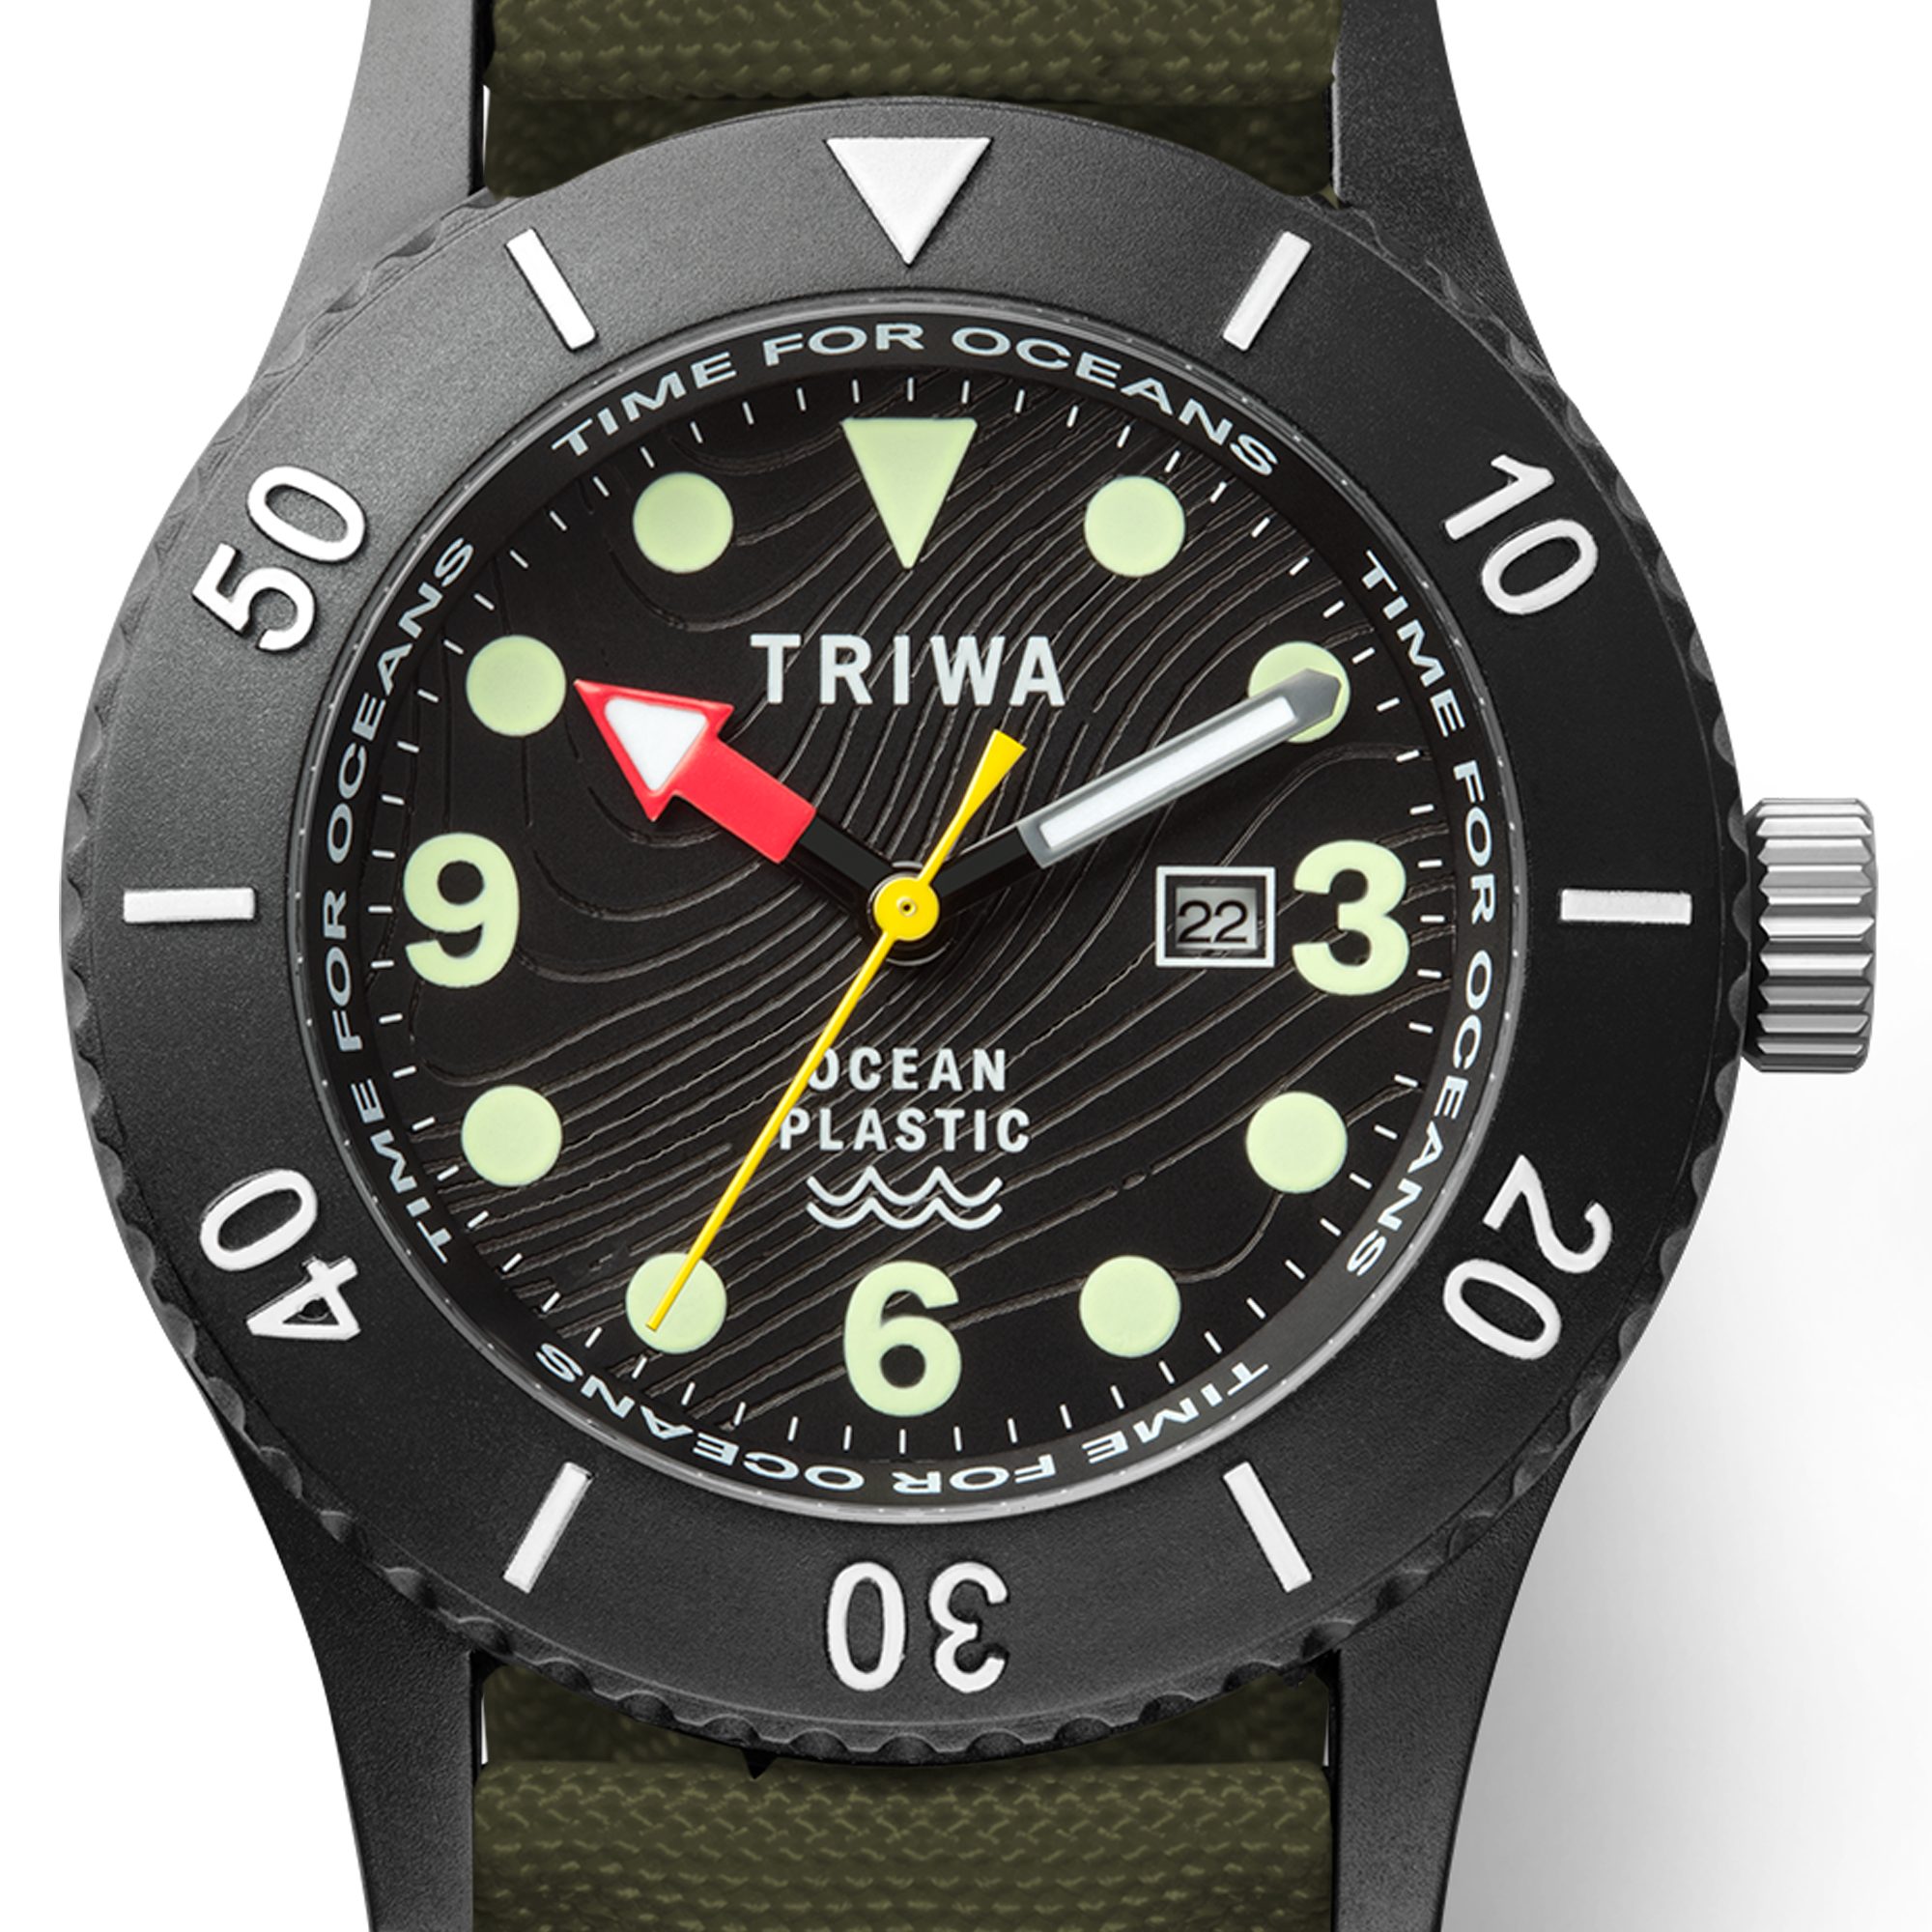 <img src="tapster.png" alt="Contactless- watch triwa sub green close up">